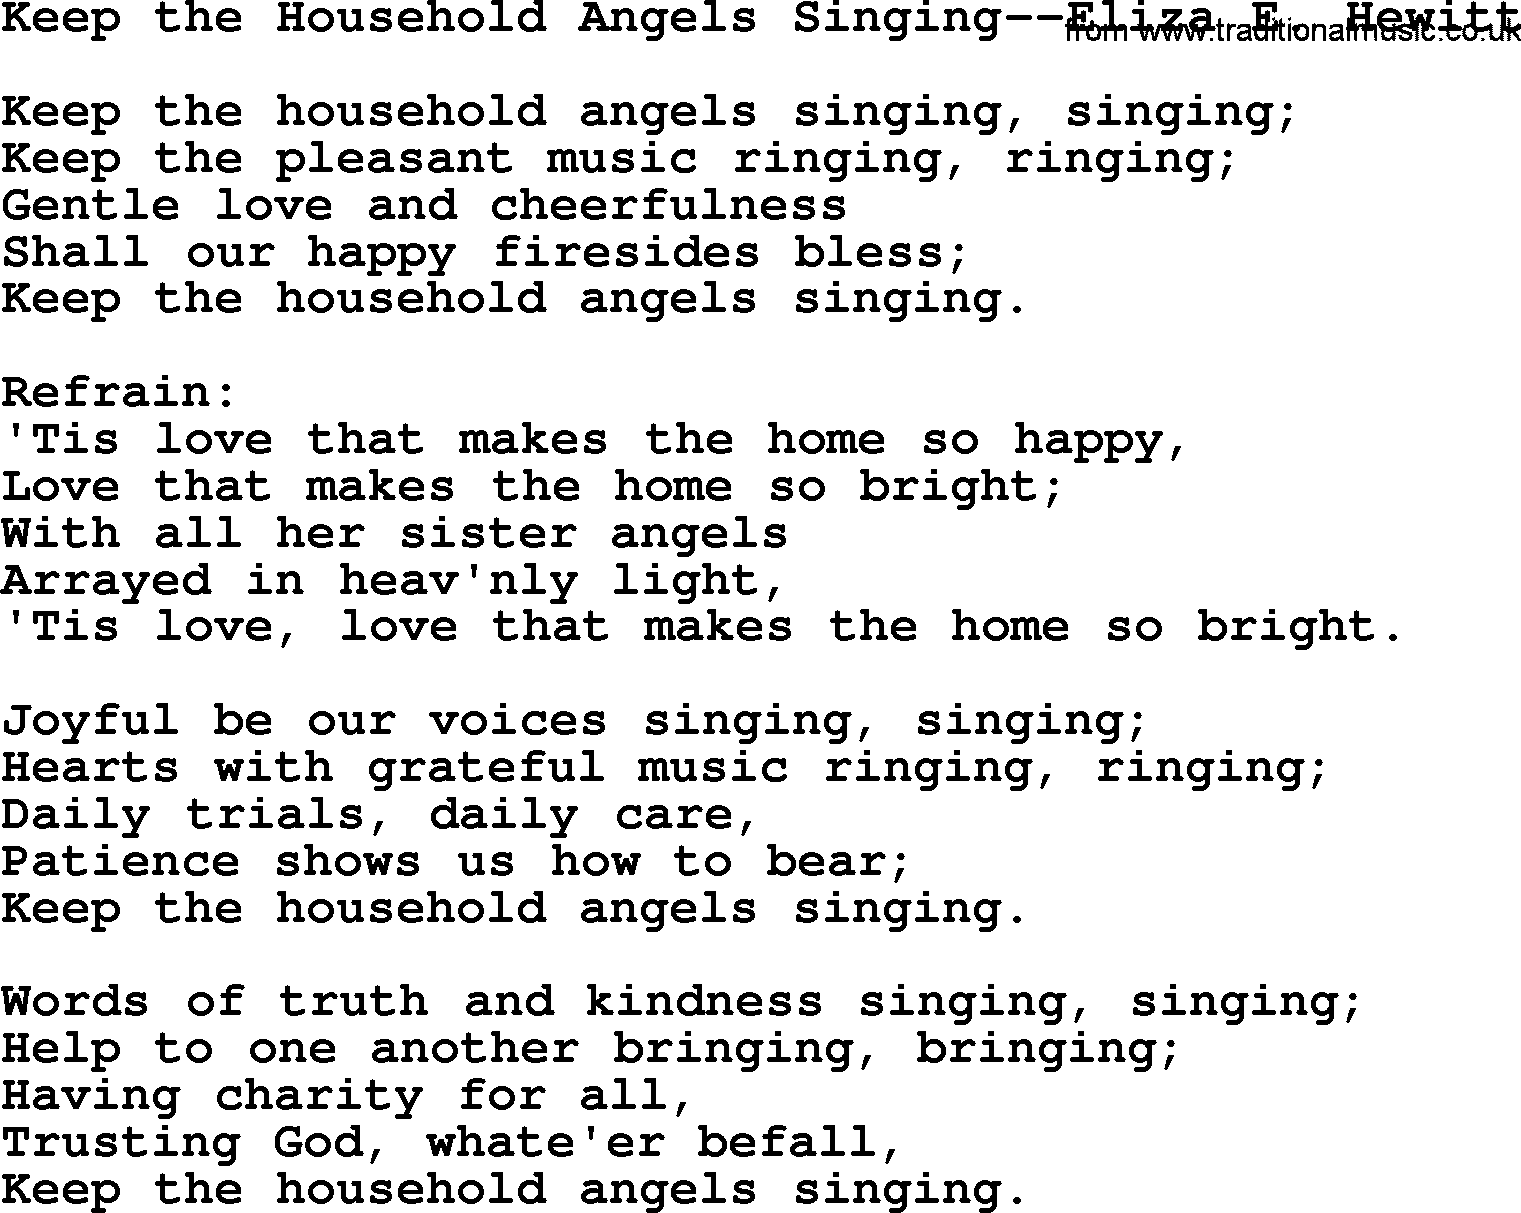 Hymns about Angels, Hymn: Keep The Household Angels Singing--eliza E. Hewitt.txt lyrics with PDF